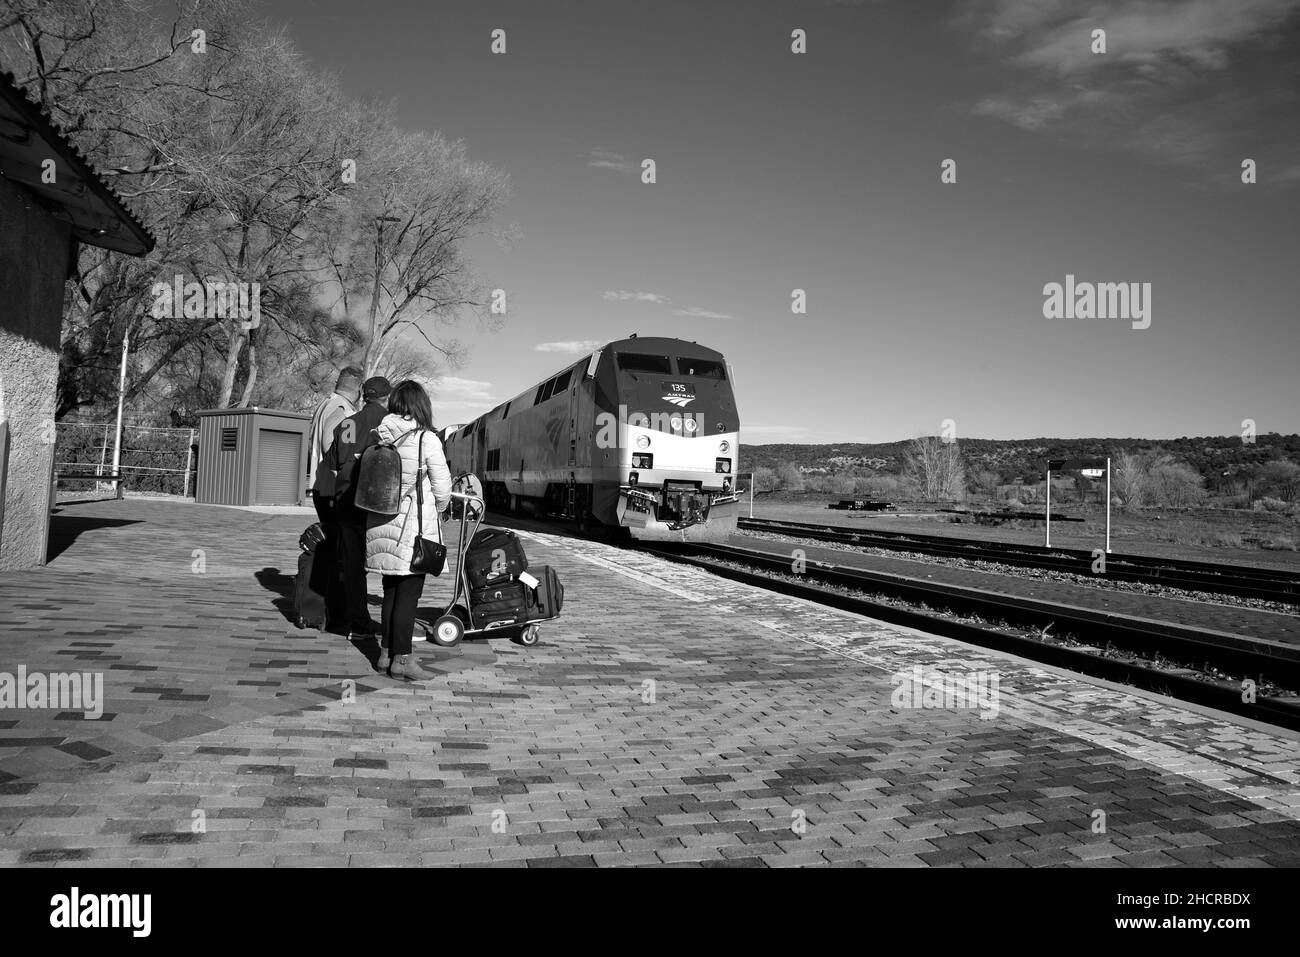 Passengers stand on the platform as an Amtrak passenger train (the Southwest Chief) arrives at the train station in Lamy, New Mexico. Stock Photo